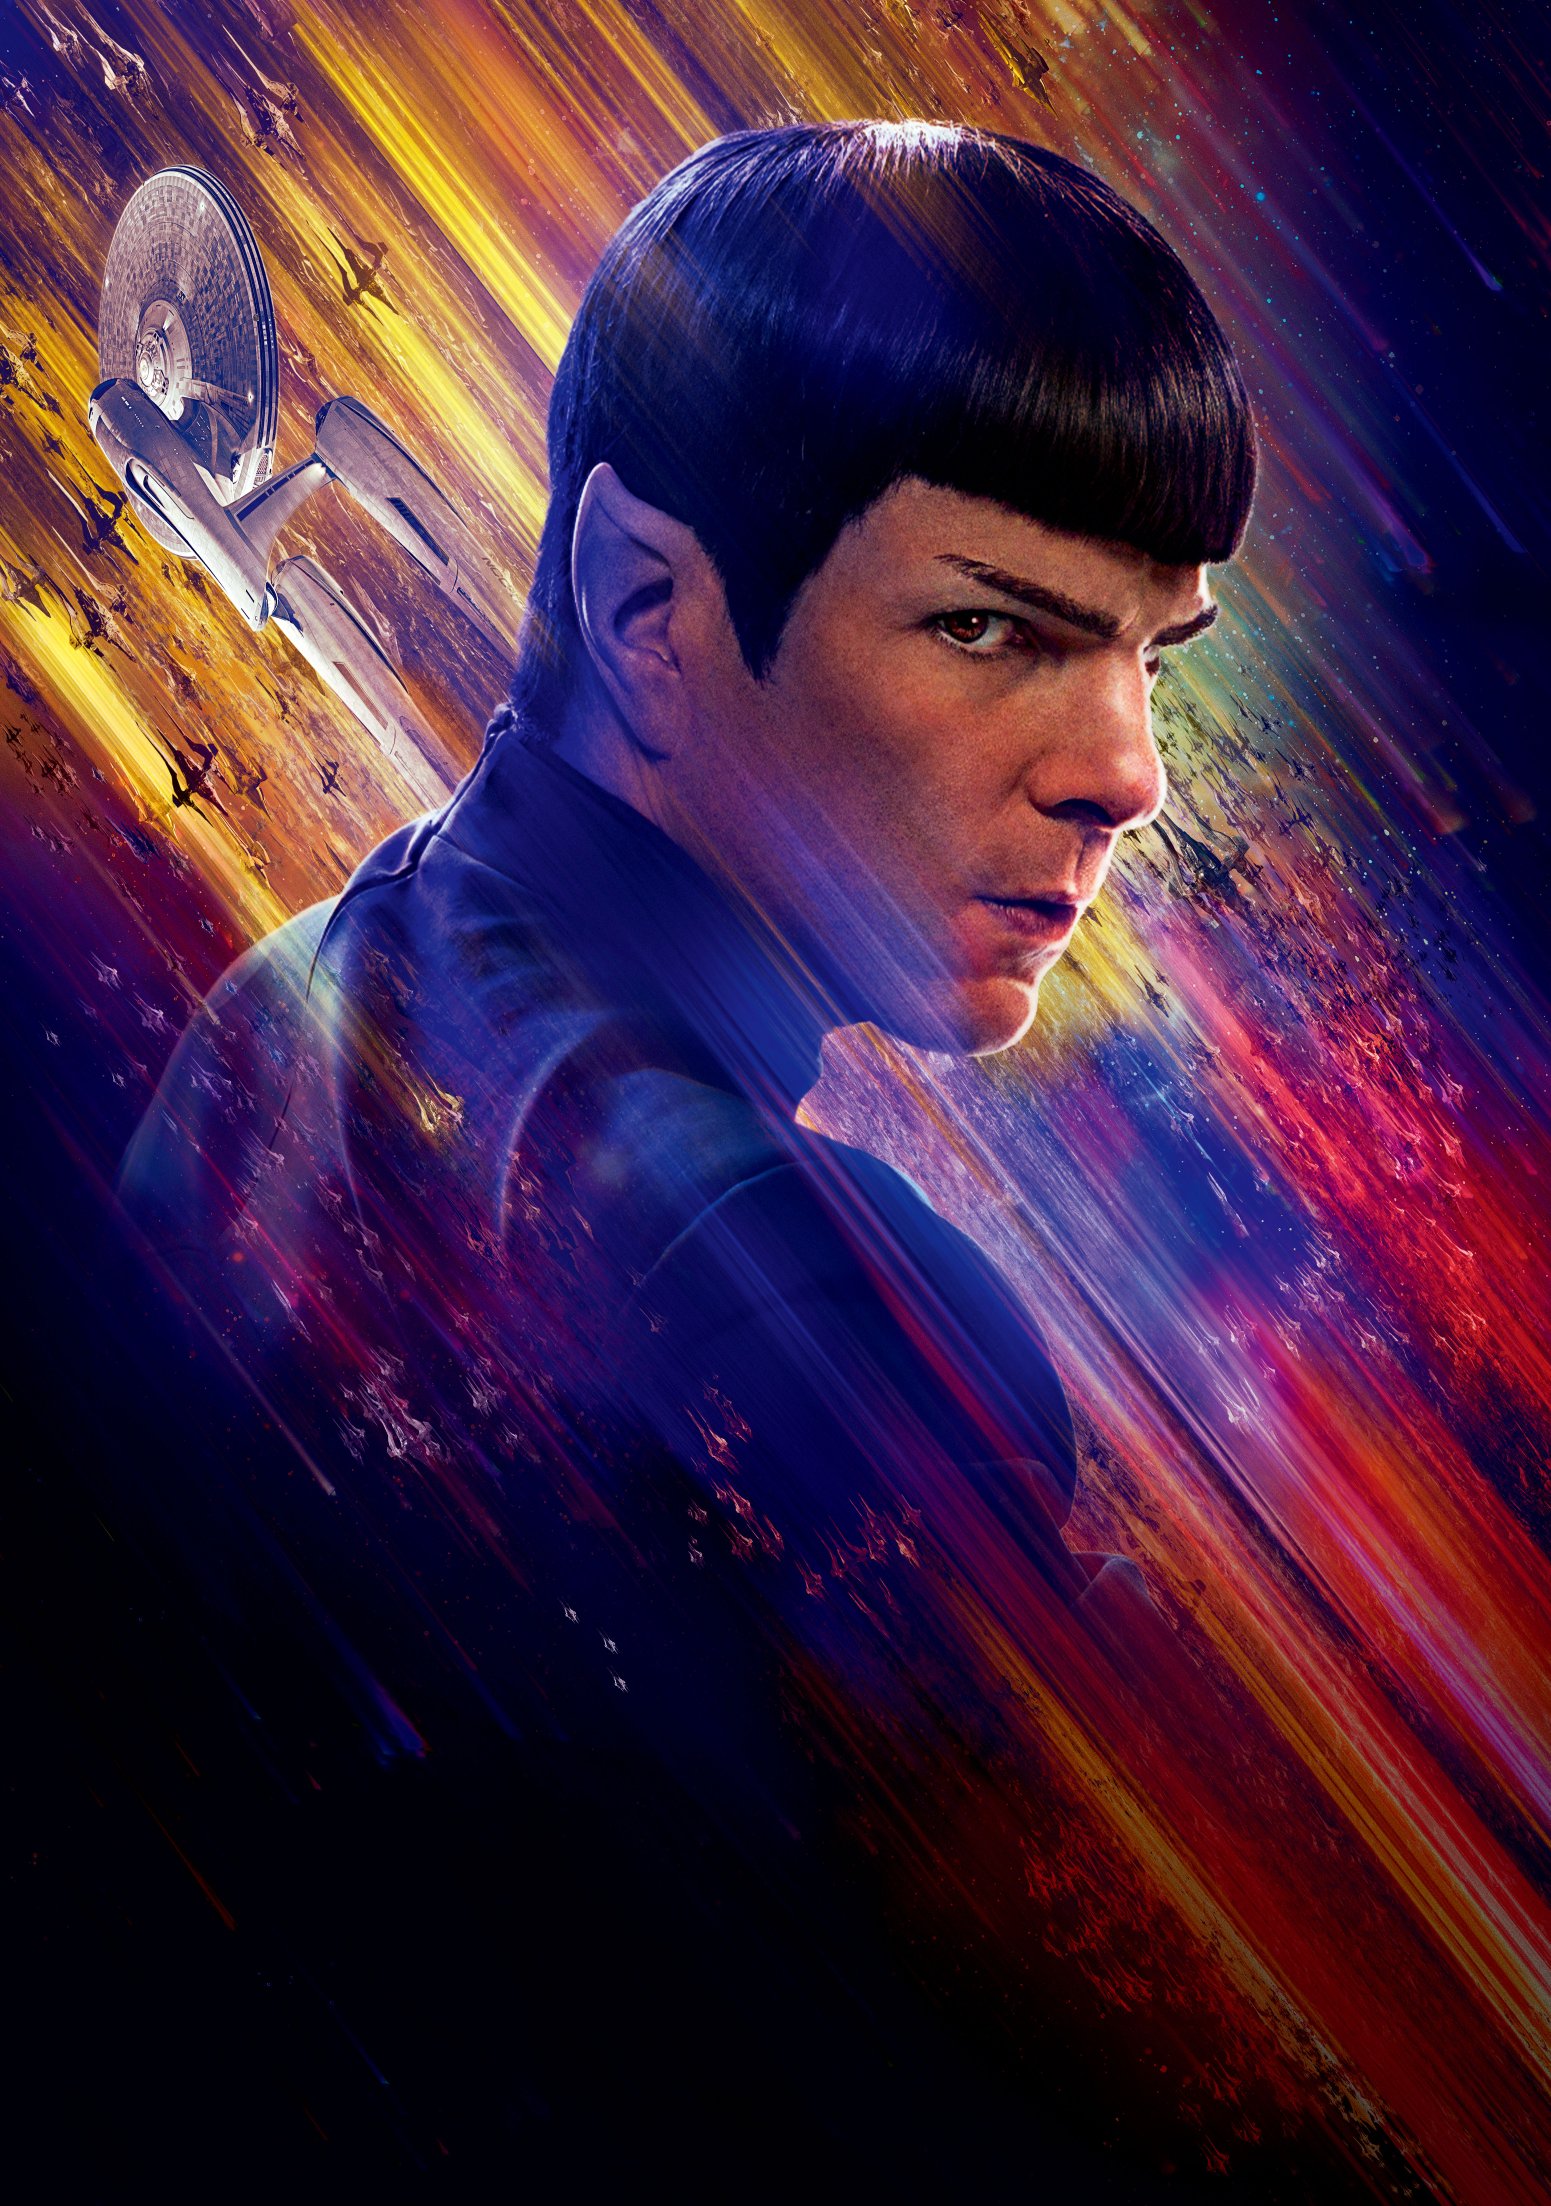 Art of Star Trek. Spock as played by Zach Quinto, here in a 'Star Trek Beyond' poster image. Nimoy will always be Spock, but Quinto and Peck have been